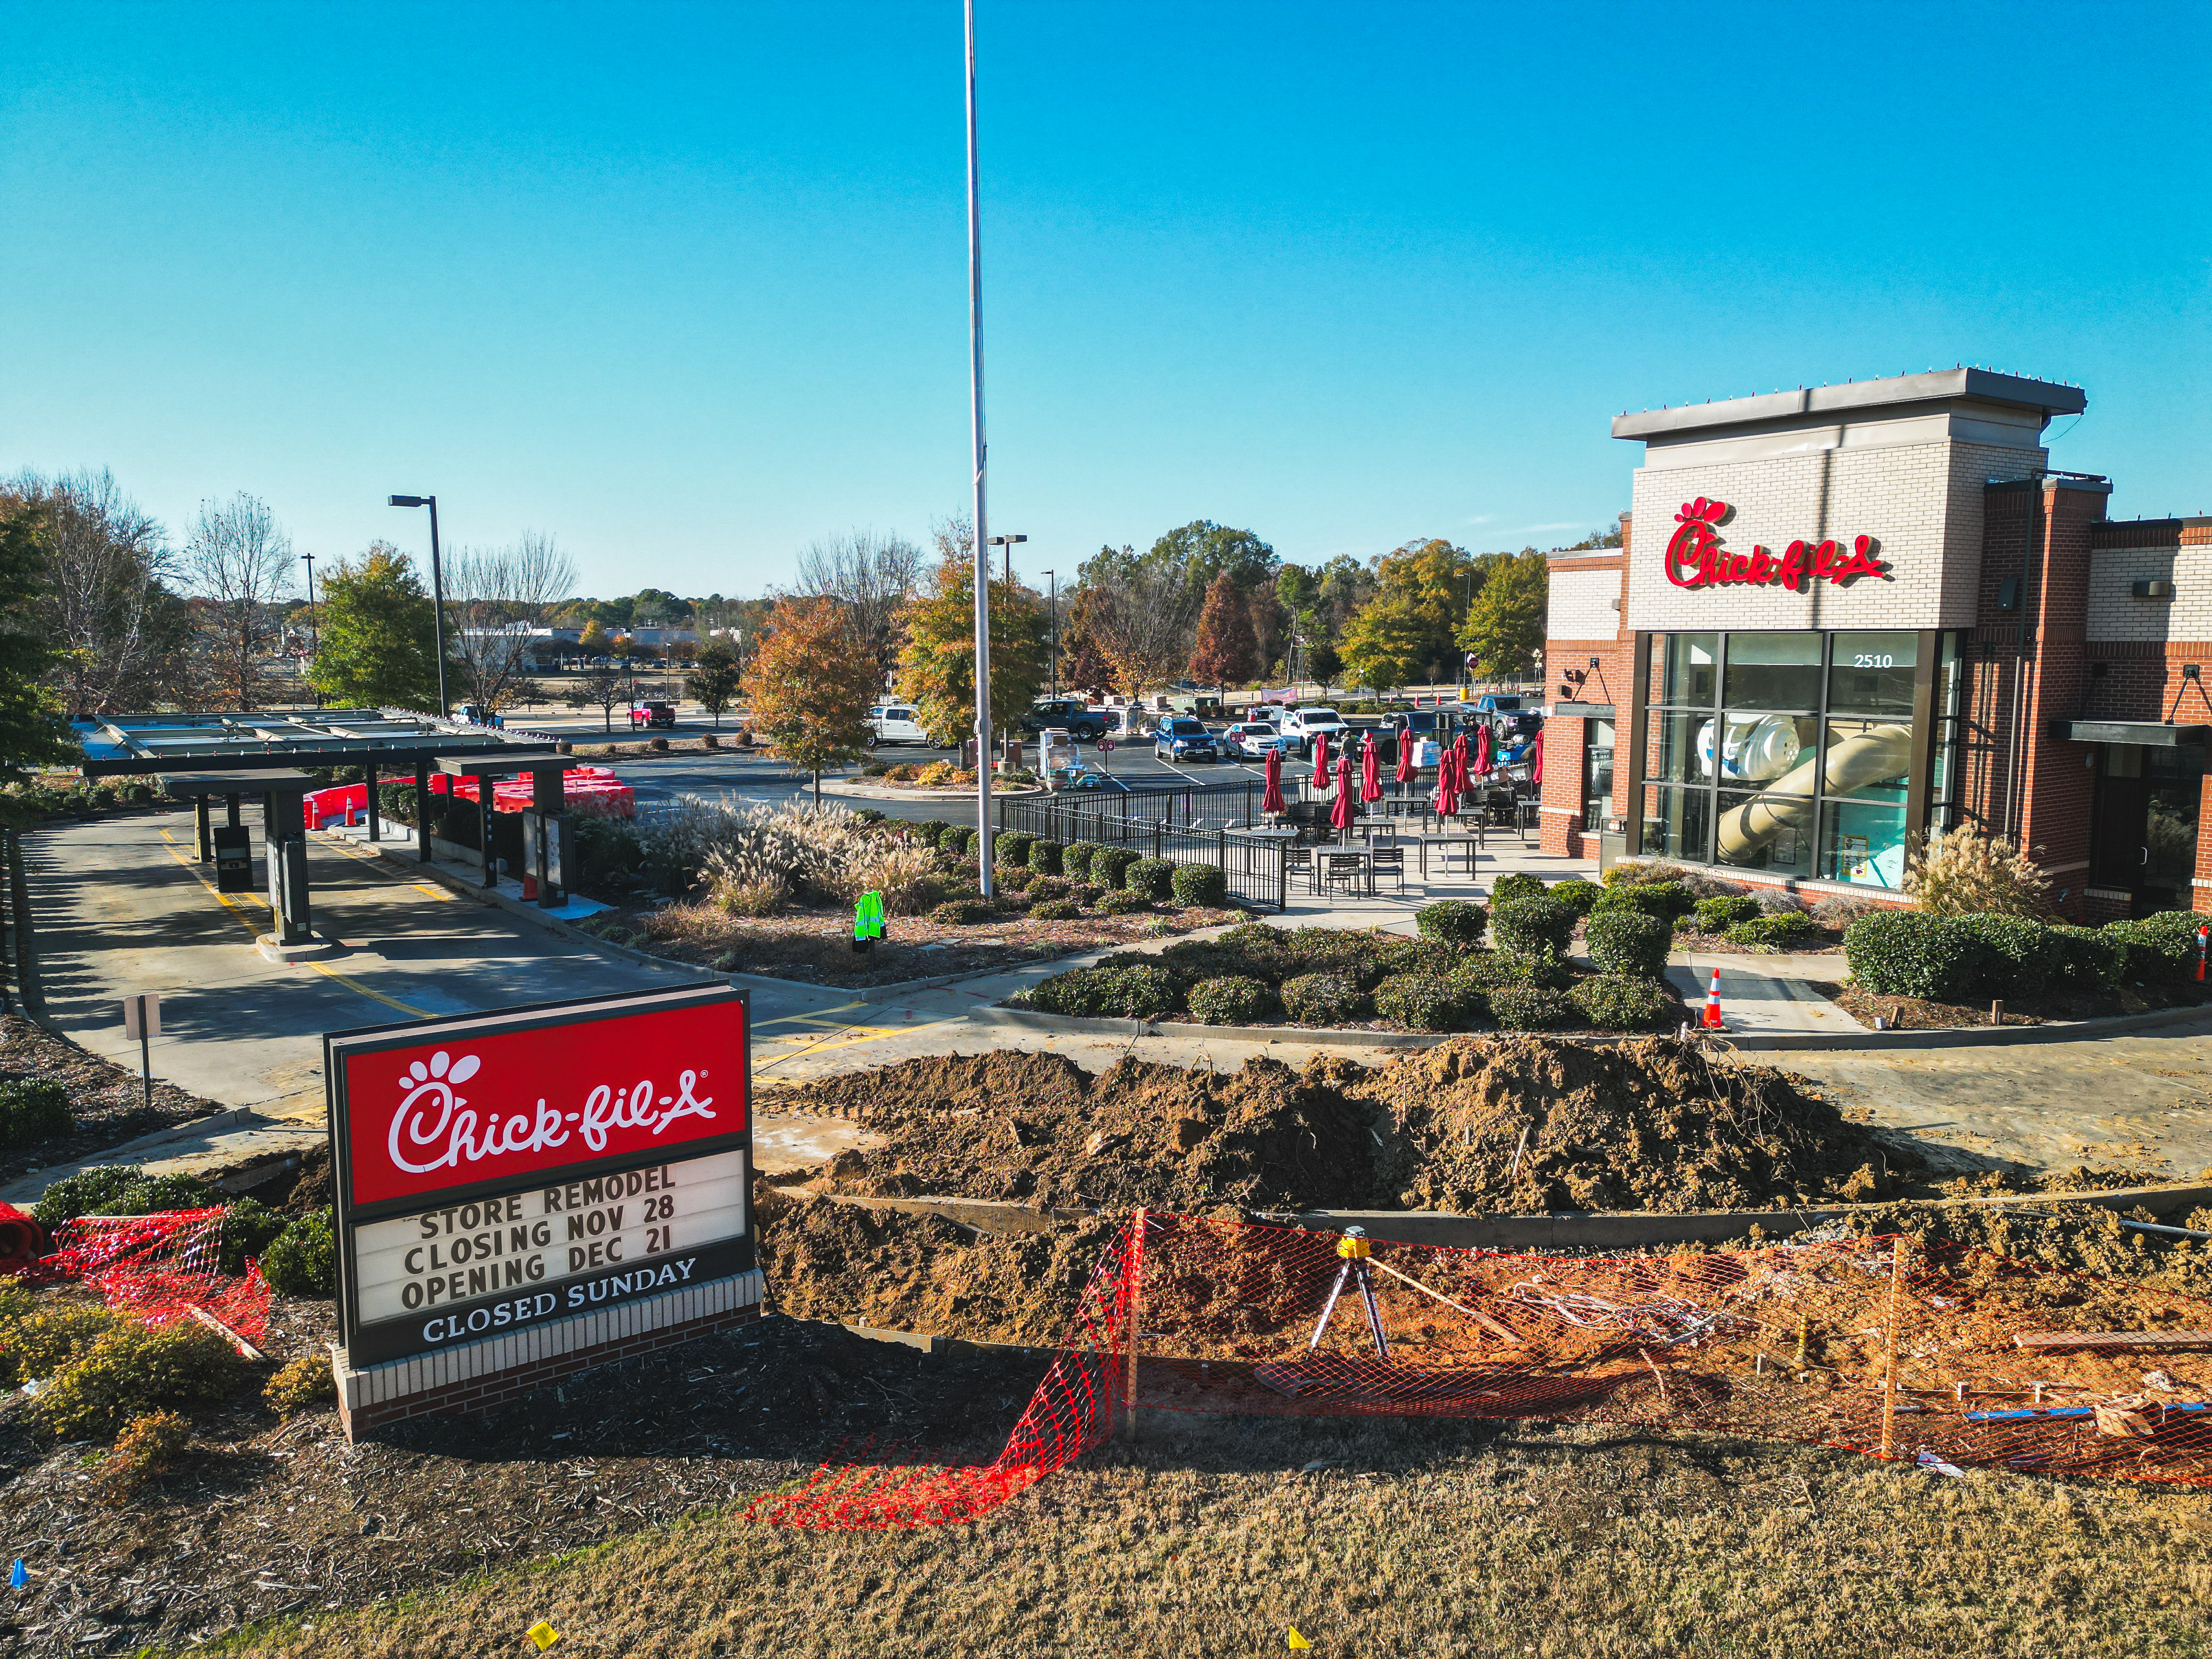 Prince Street Chick-fil-A Closed Until Dec. 21 for Renovations 